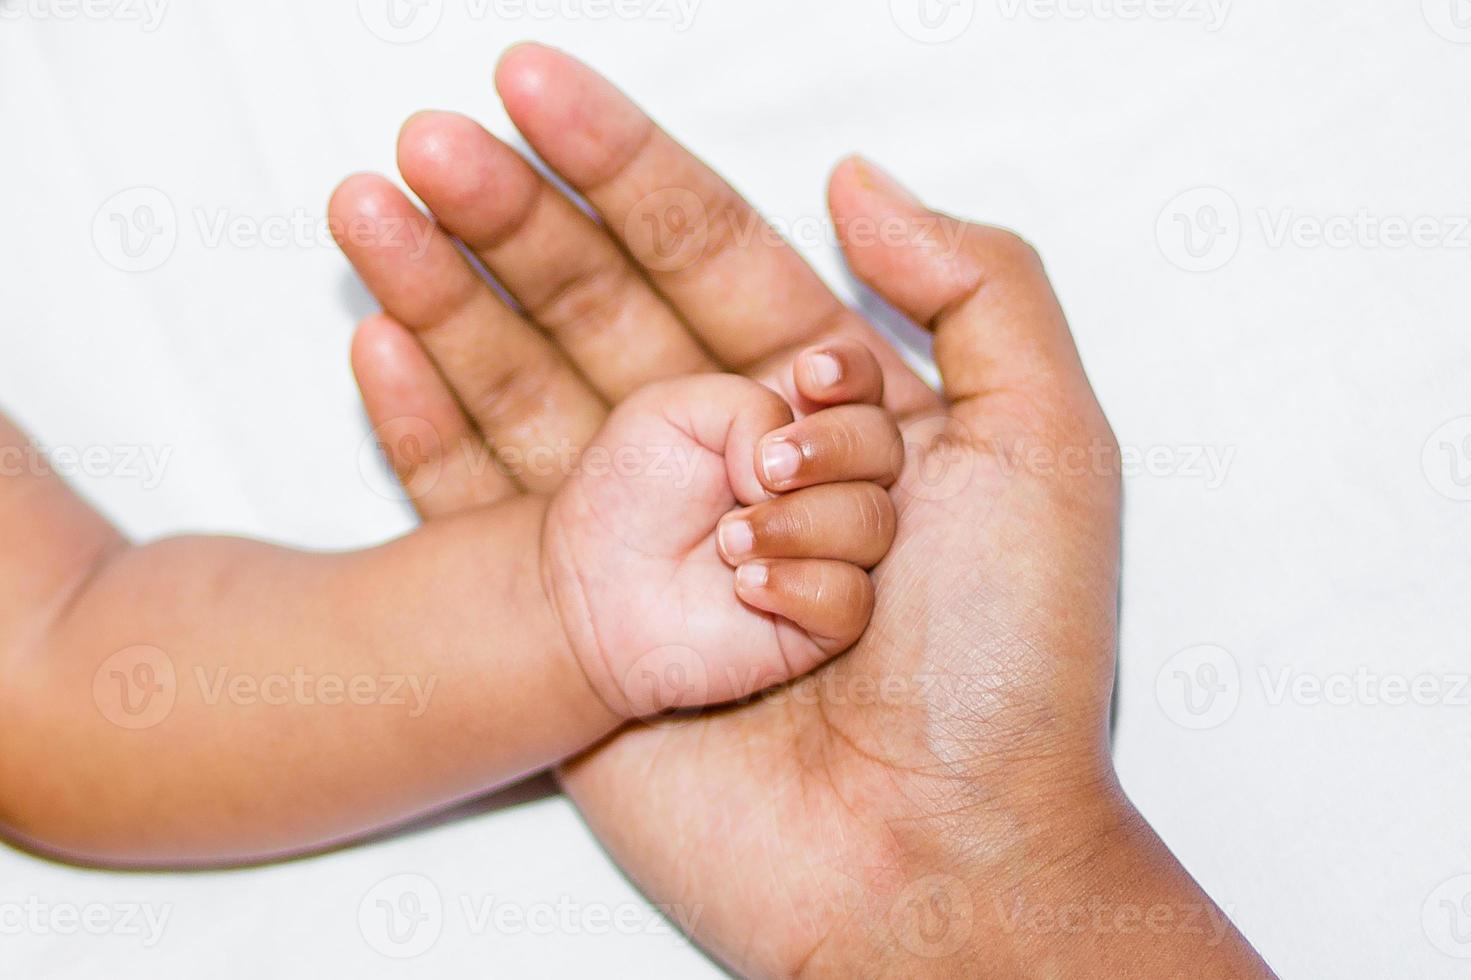 A new born baby's soft hand on mother's hand on a white background. photo